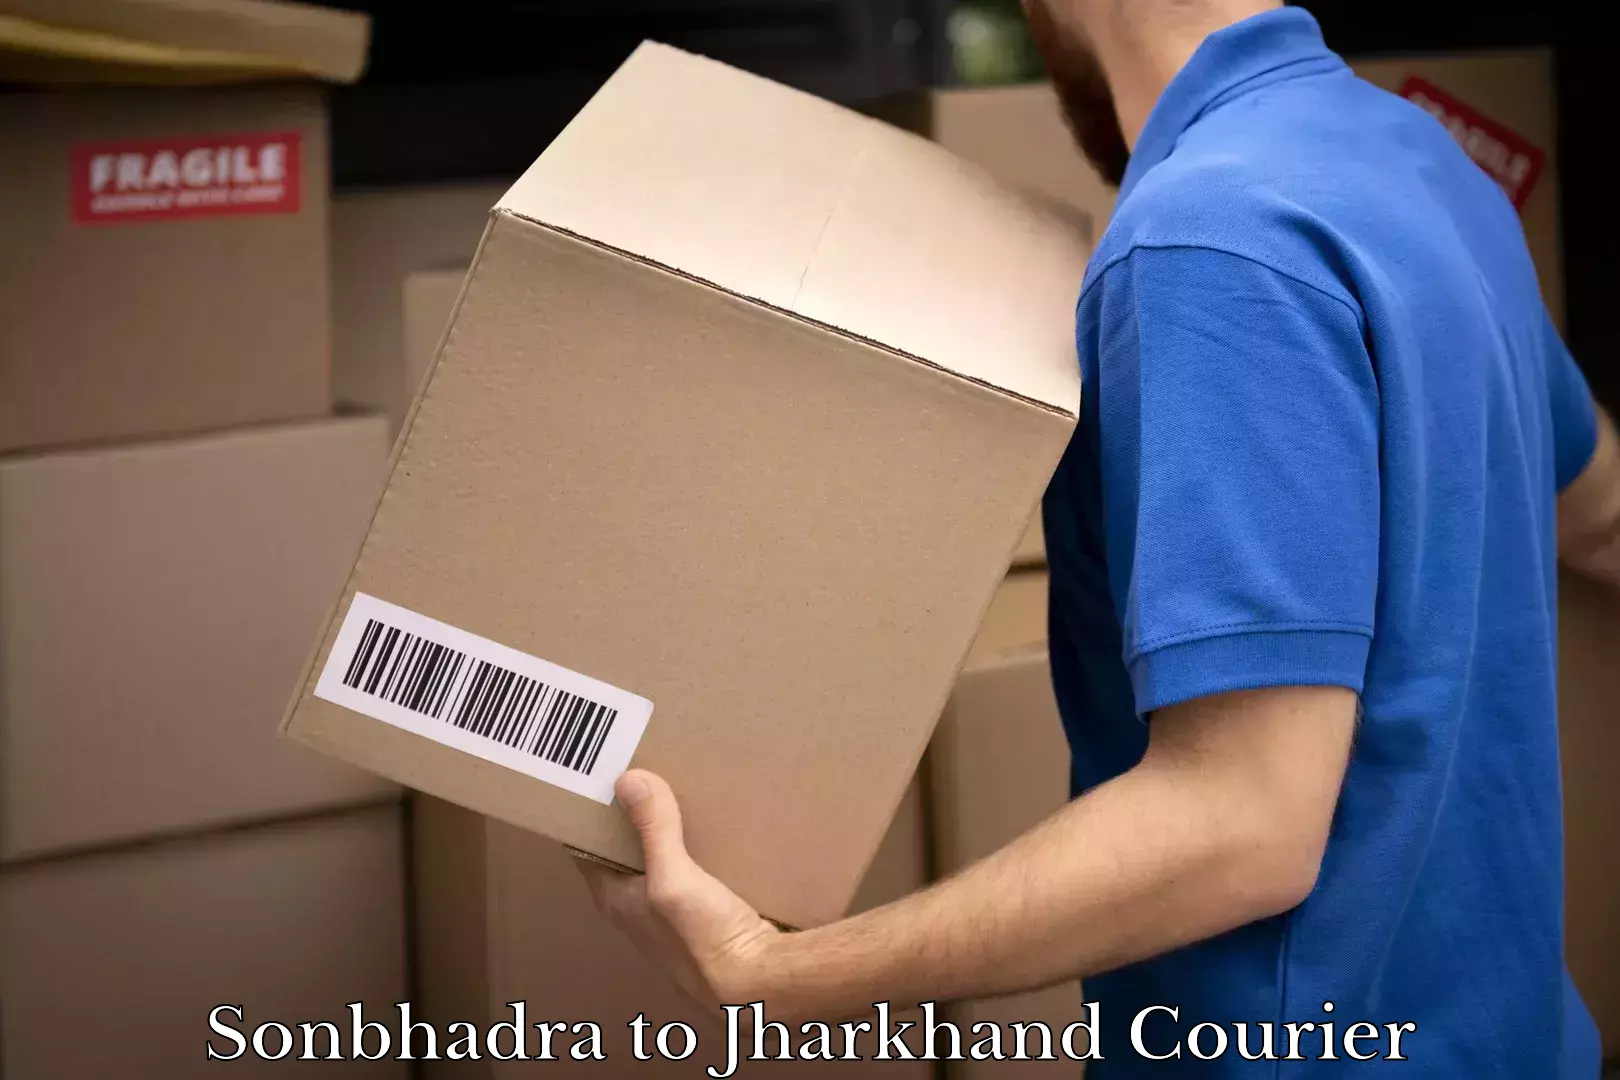 Automated parcel services Sonbhadra to Jharkhand